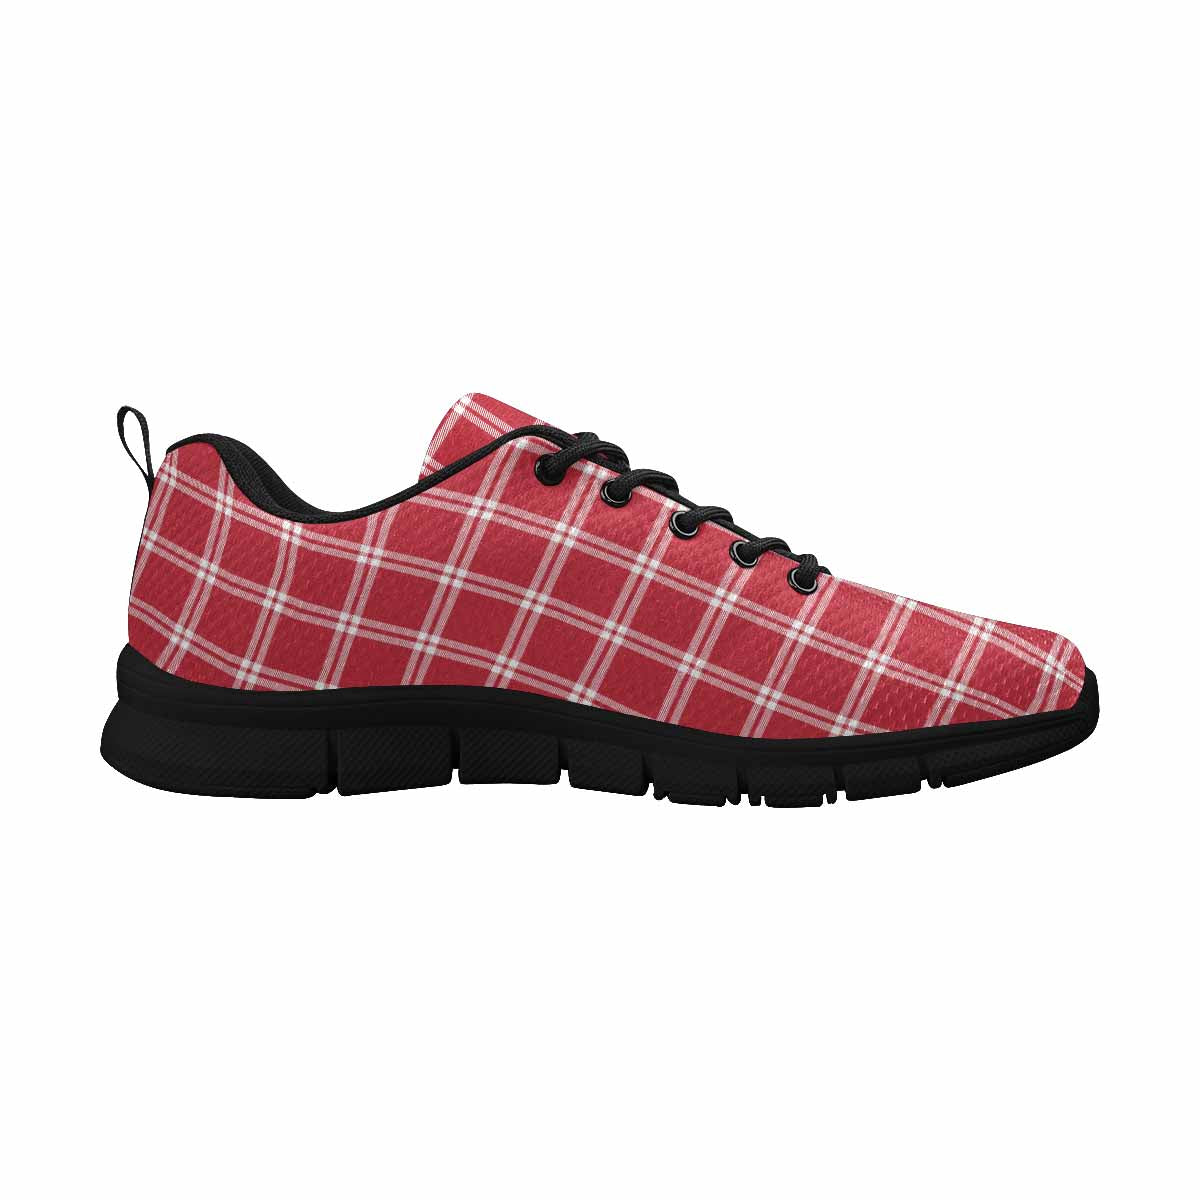 Sneakers For Men, Buffalo Plaid Red And White Running Shoes Dg864